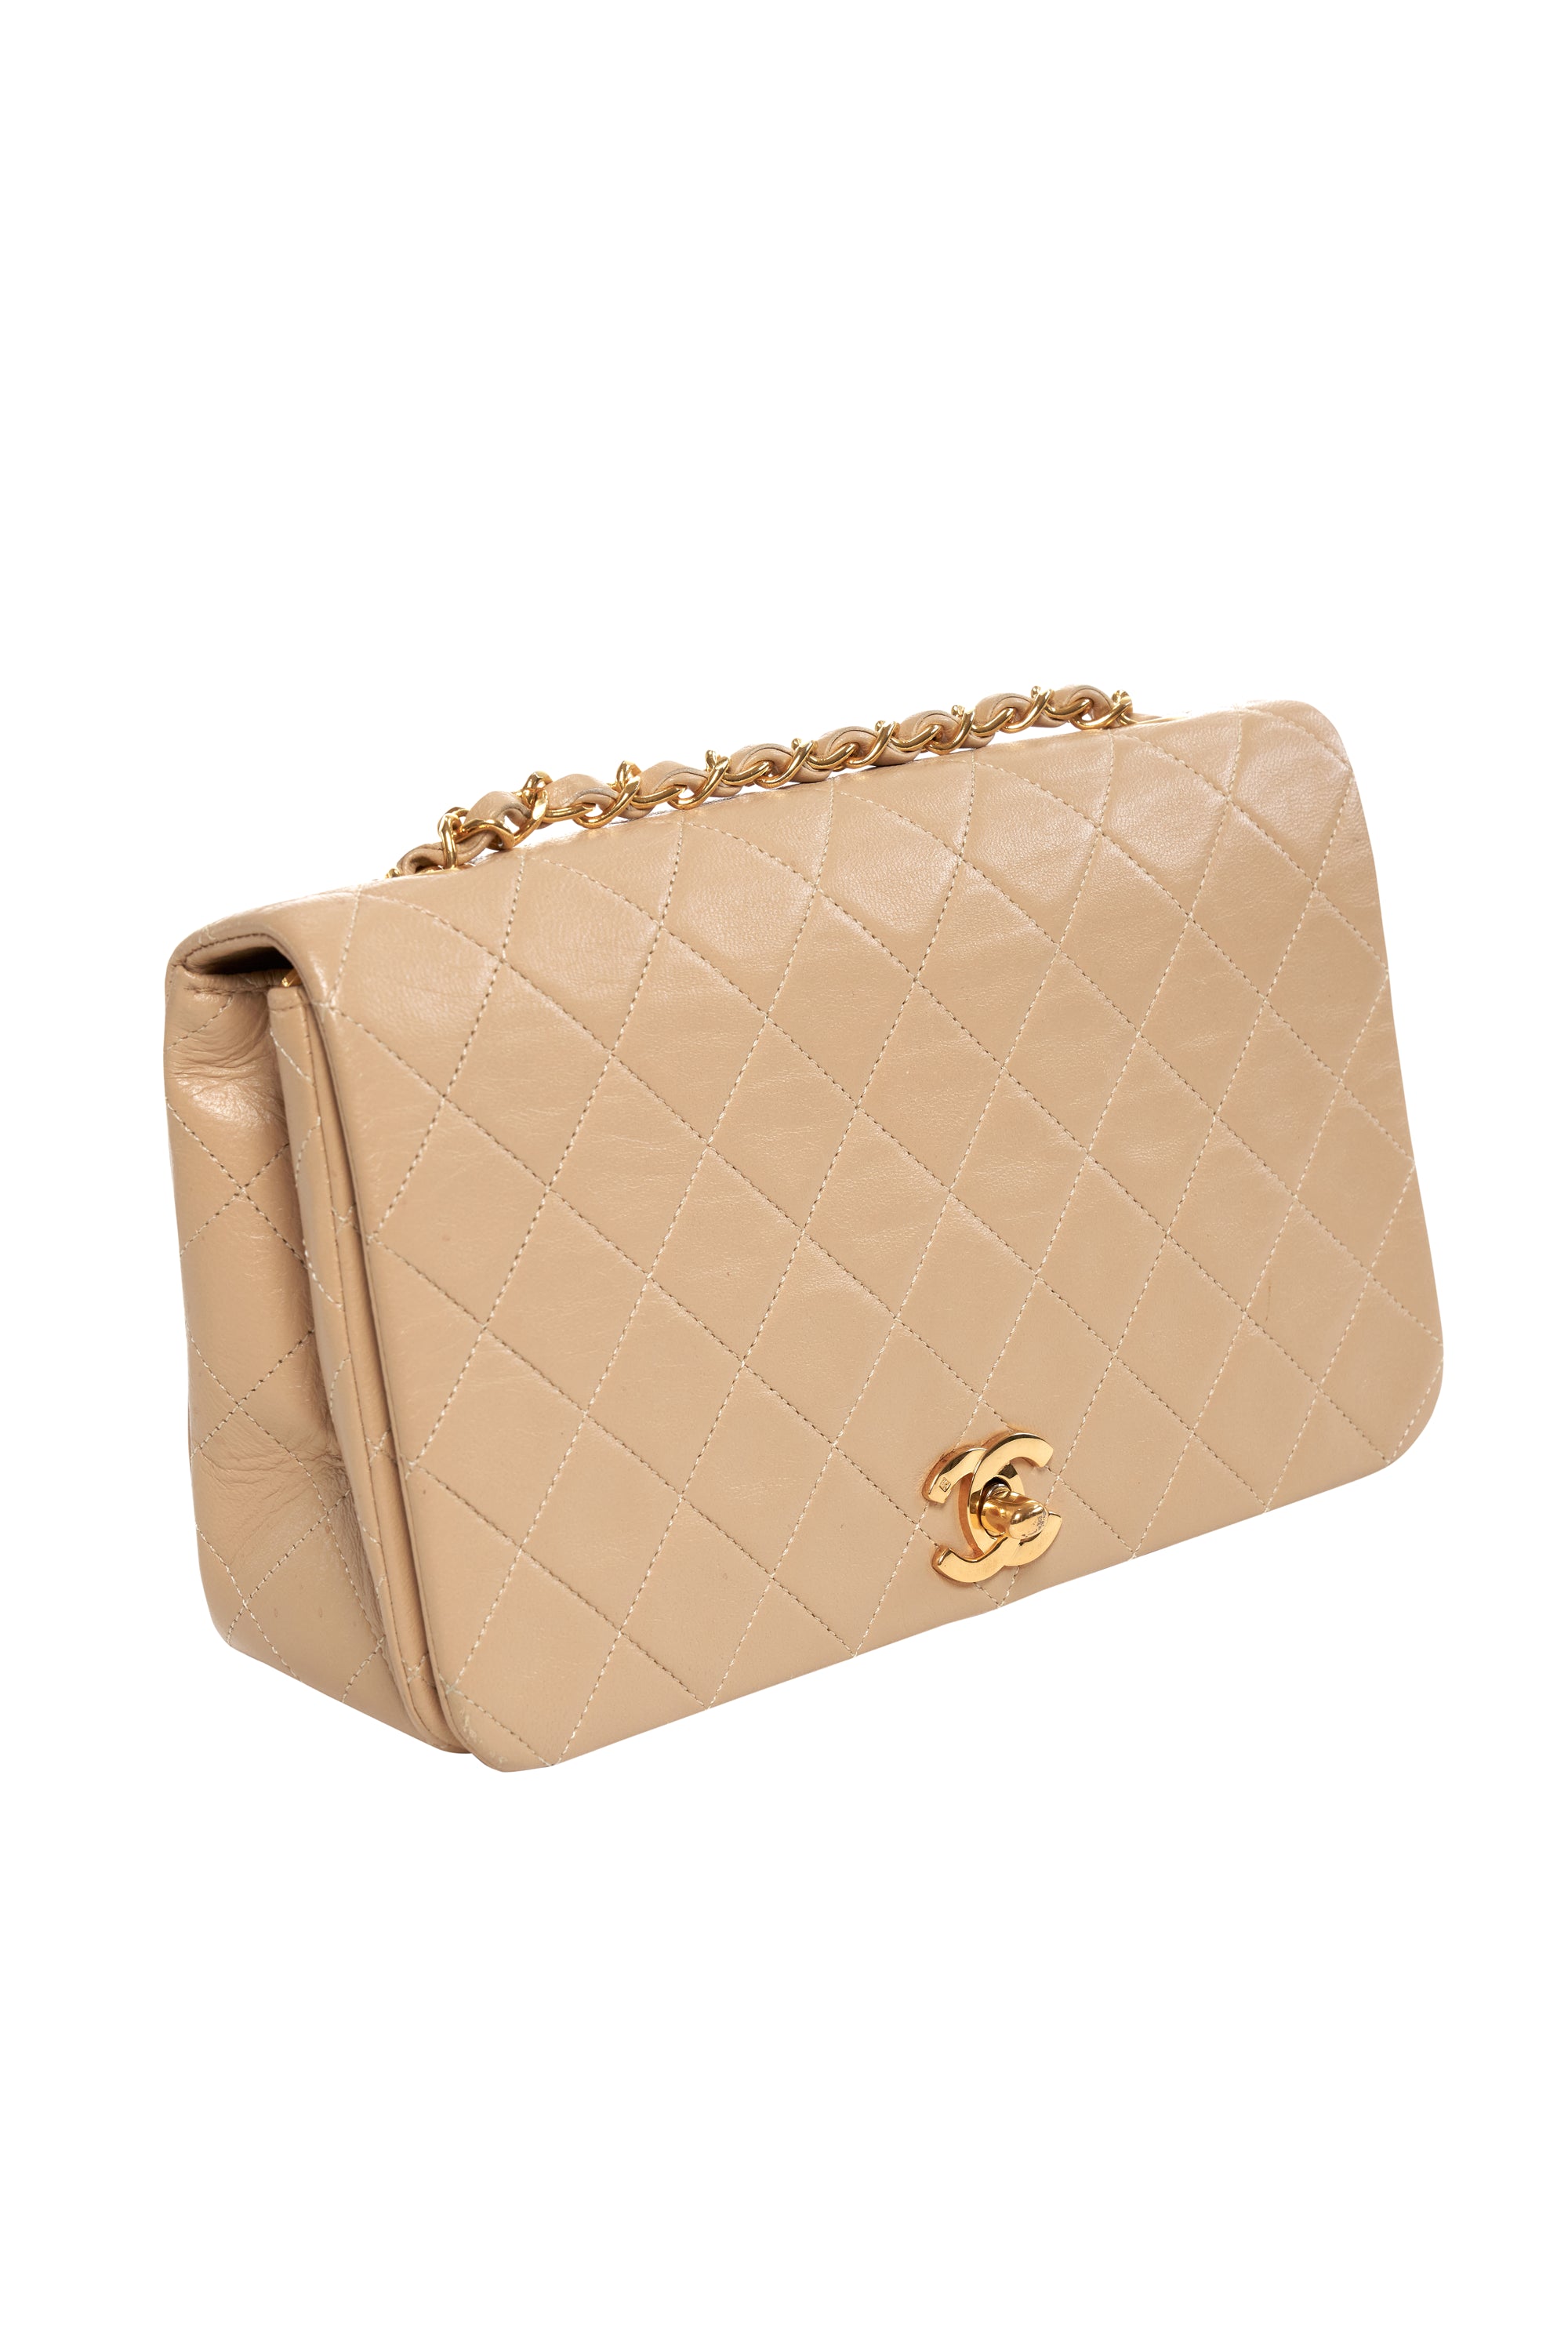 Chanel Vintage Nude Quilted Flap Purse